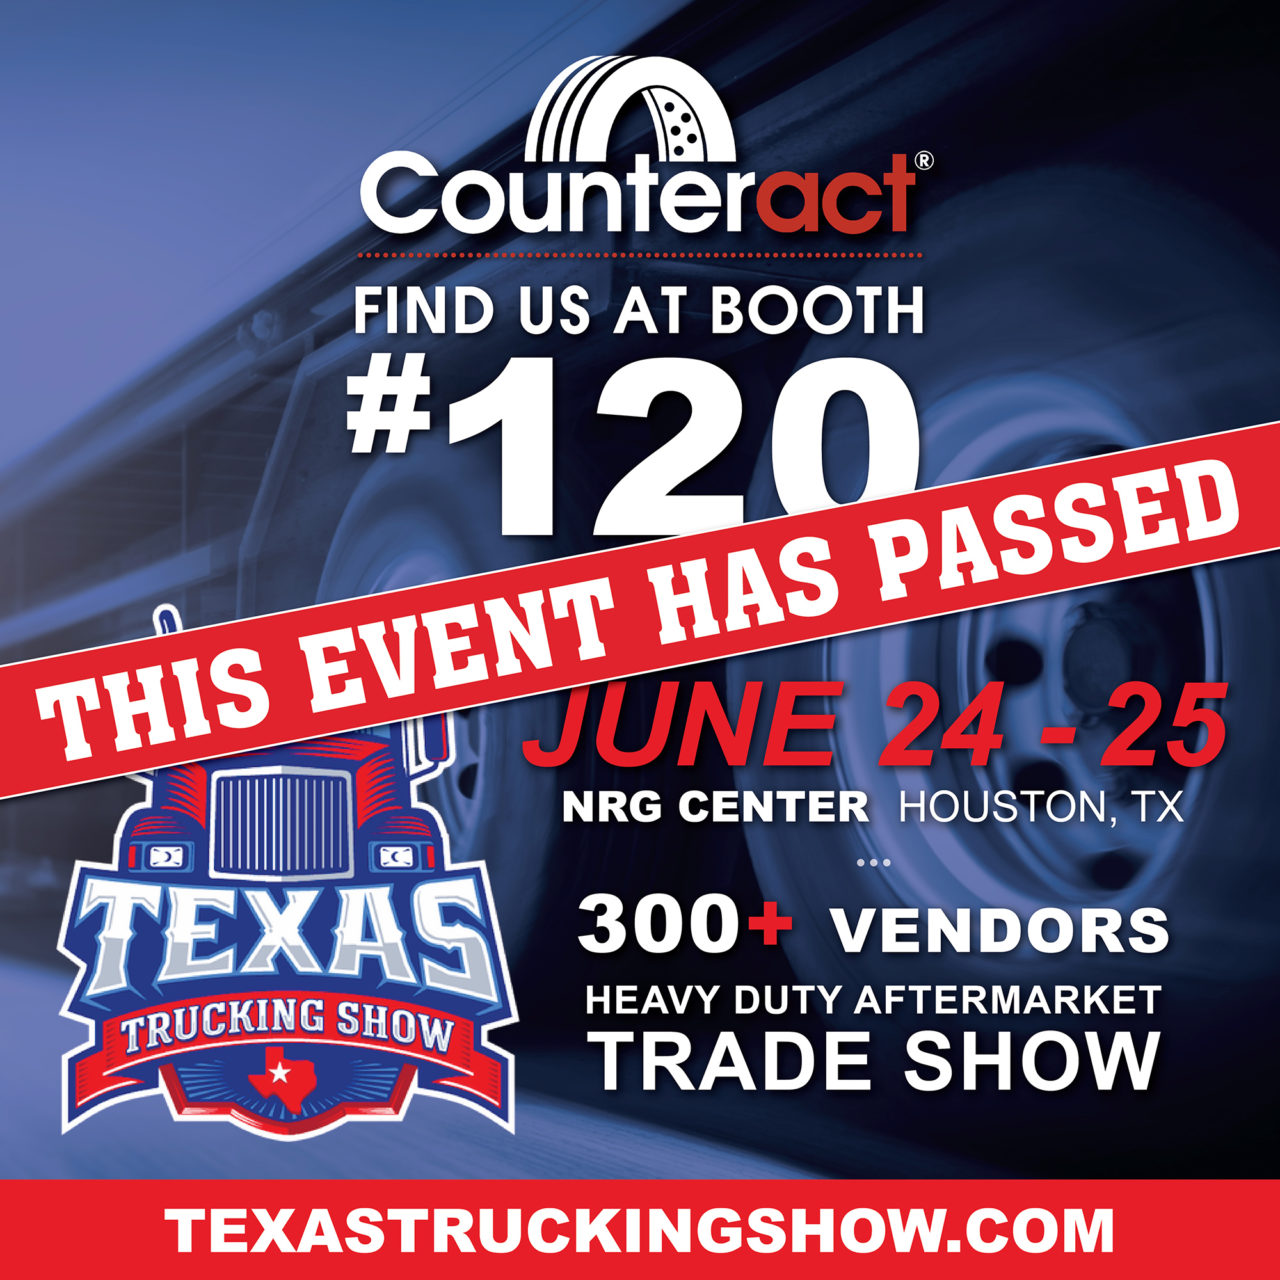 EVENT EXPIRED Texas Trucking Show June 24 25, 2023 Counteract